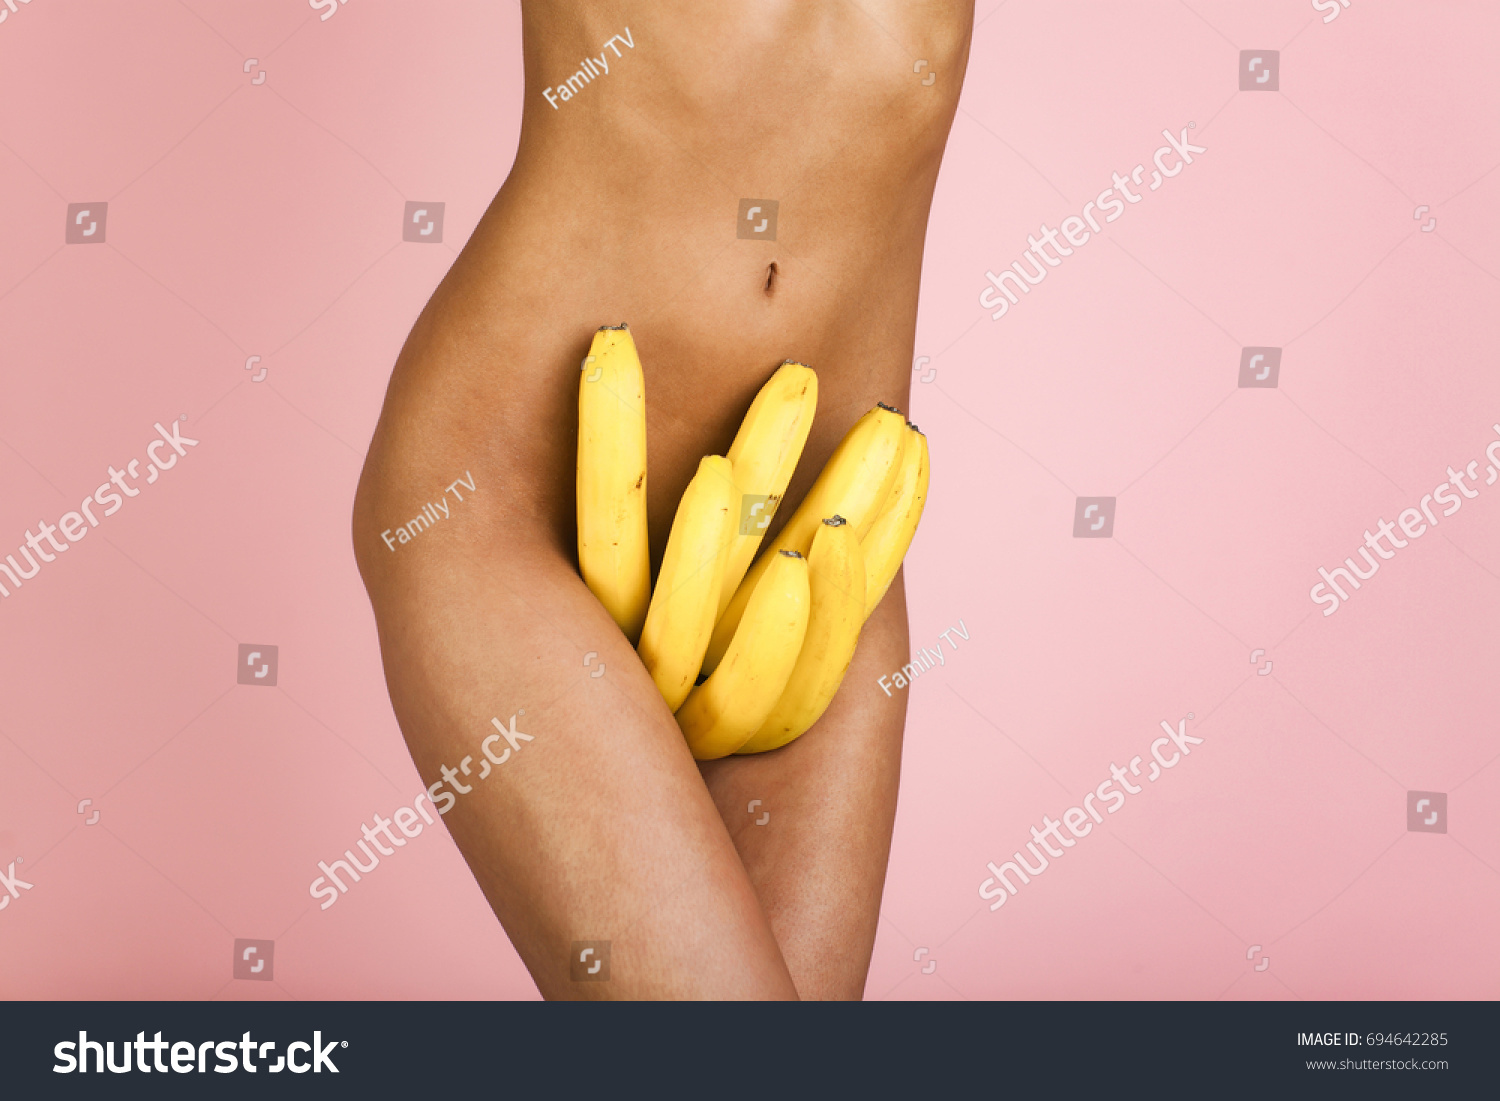 stock-photo-sexy-couple-banana-woman-top-view-of-sensual-beautiful-young-couple-having-sex-on-bed-sex-694642285.jpg